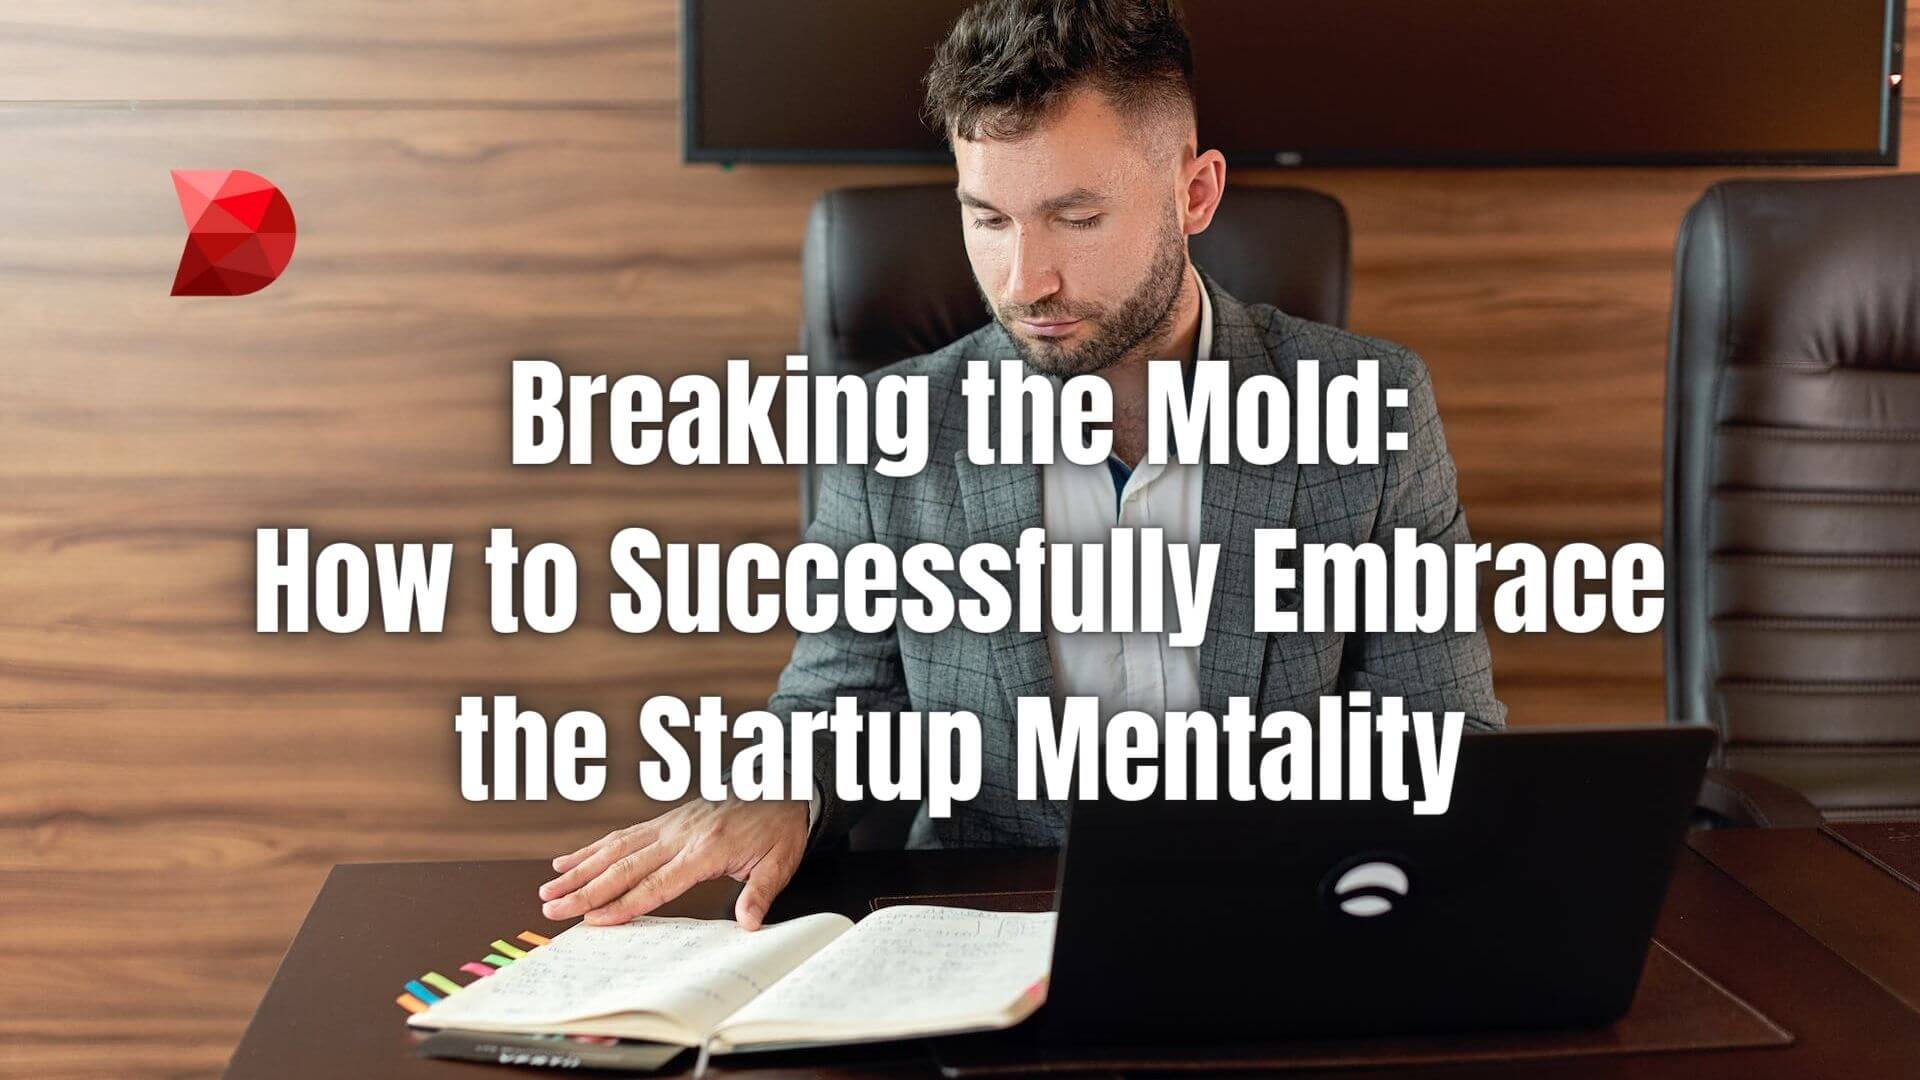 Discover the key steps to adopting a thriving startup mentality. Click here to learn how to embrace change and drive success effectively.